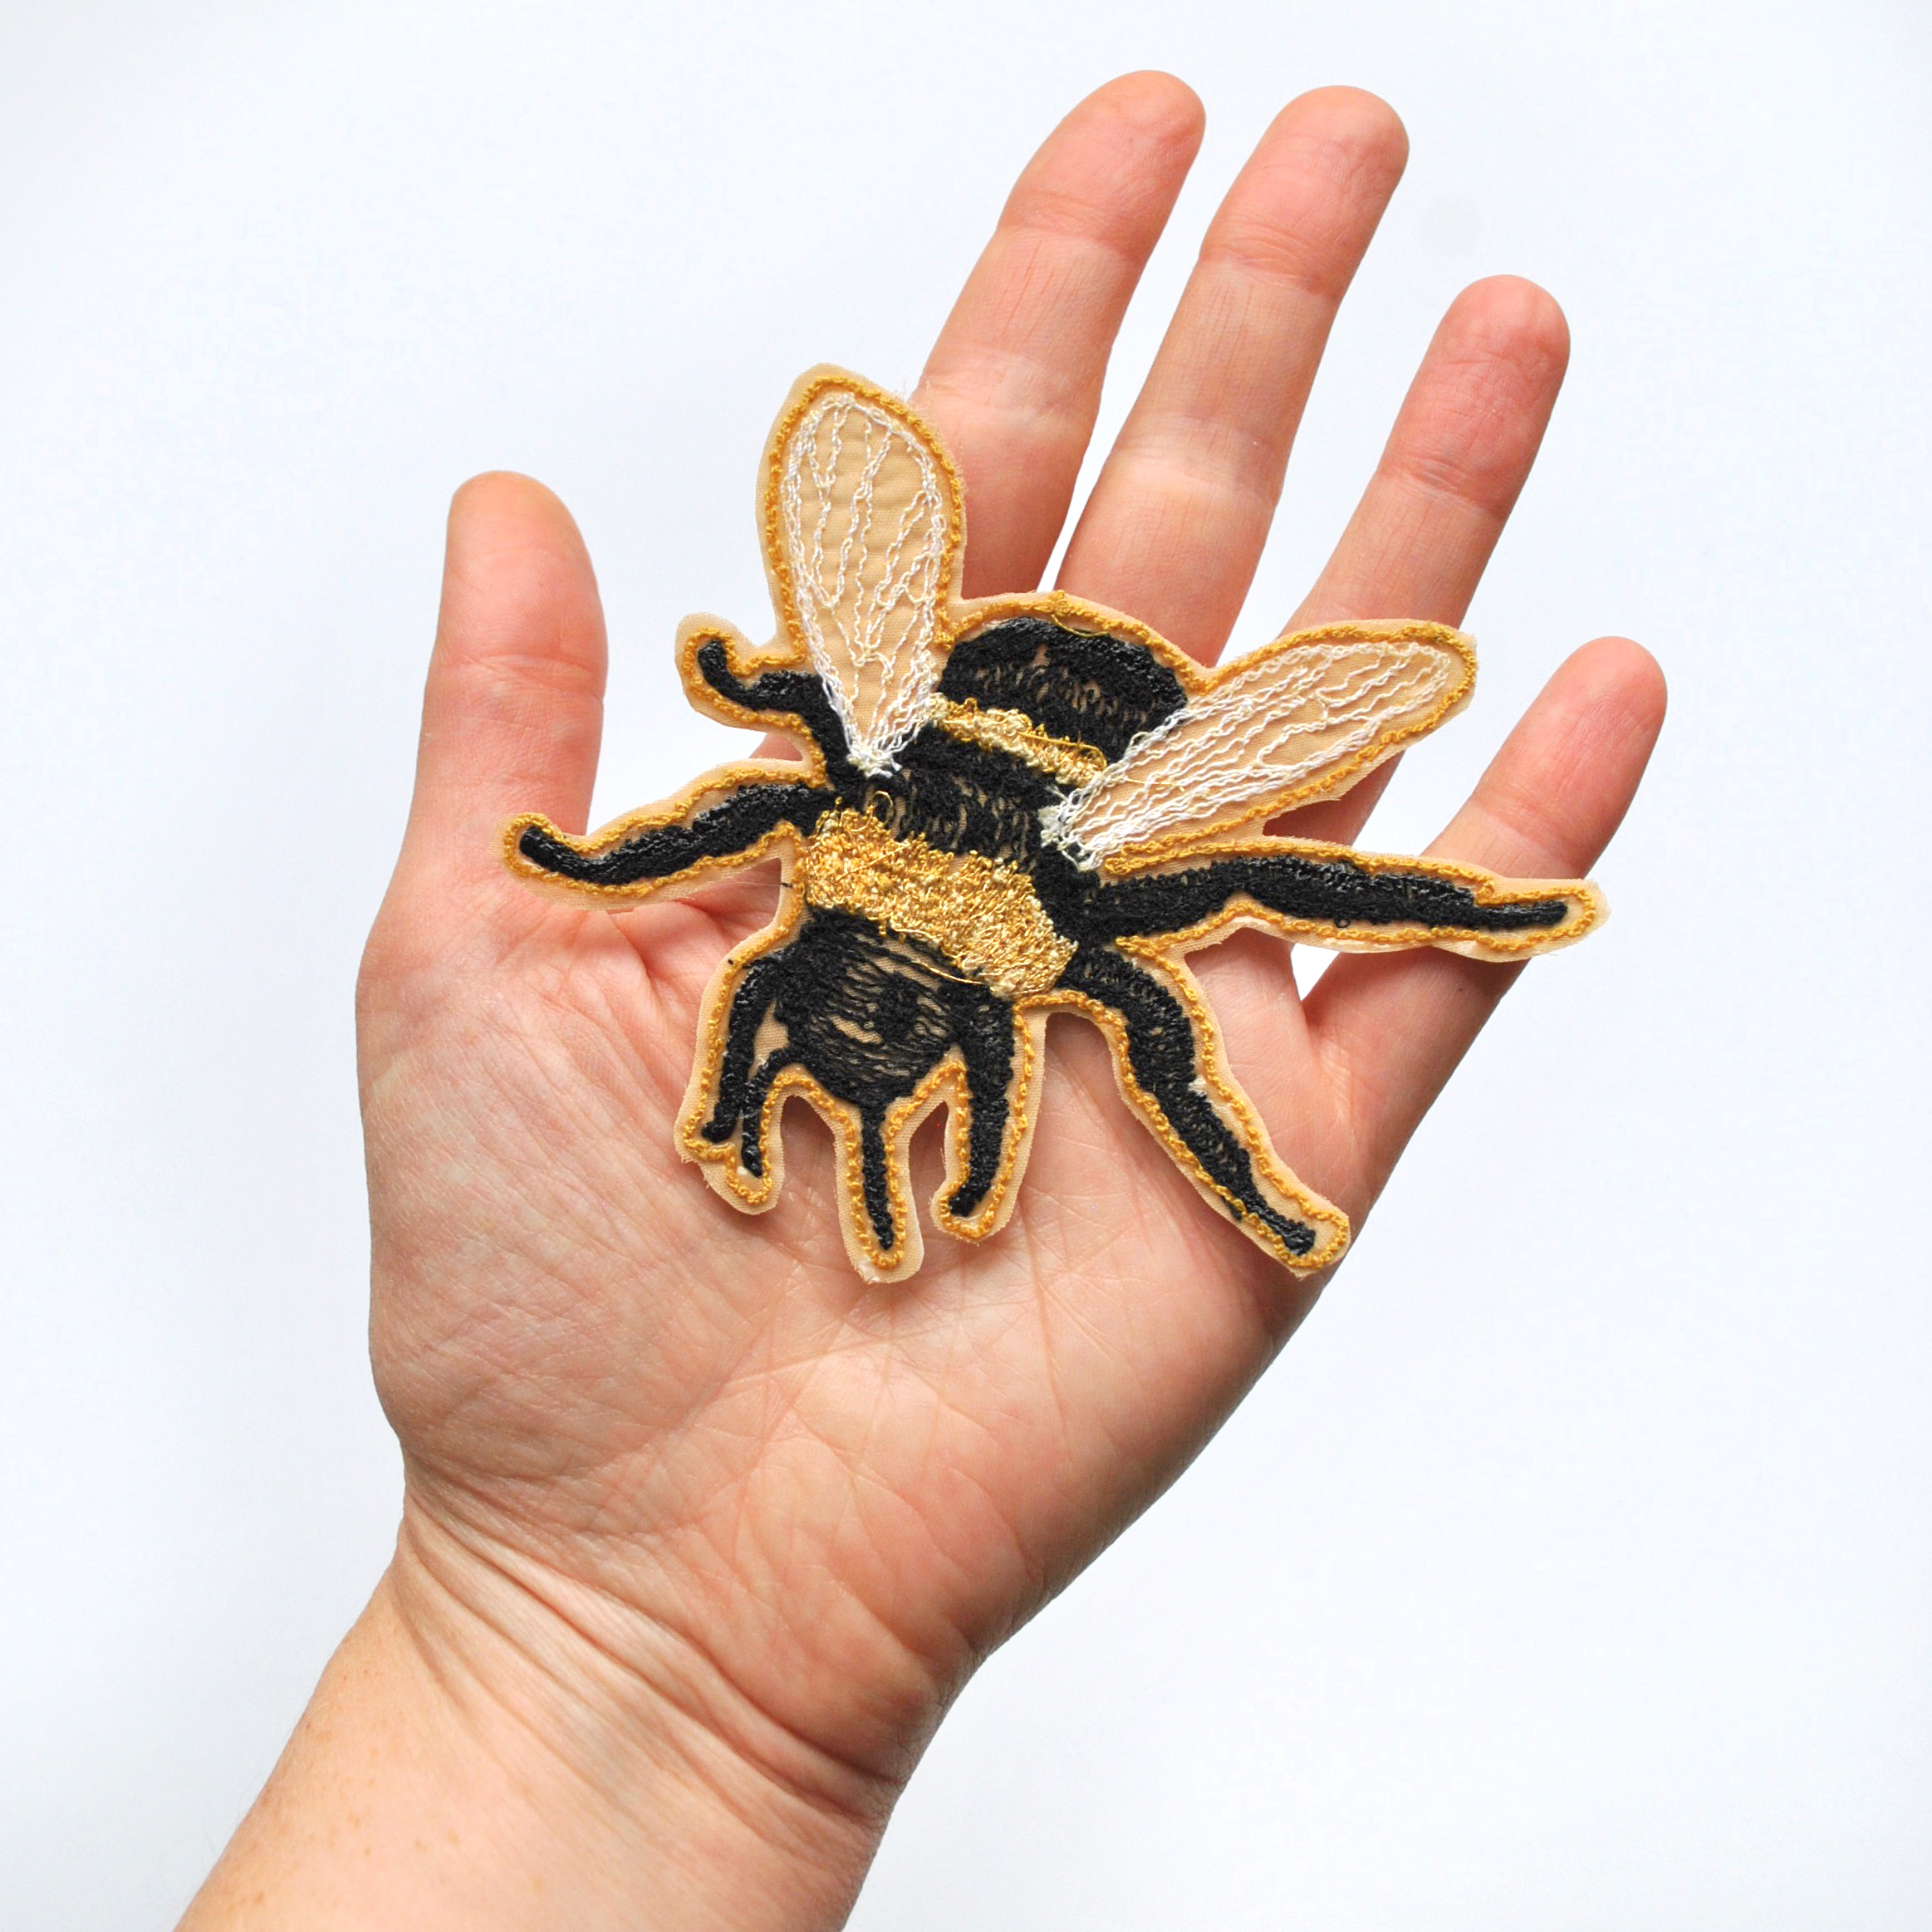 Iron-On Embroidered Bee Patch